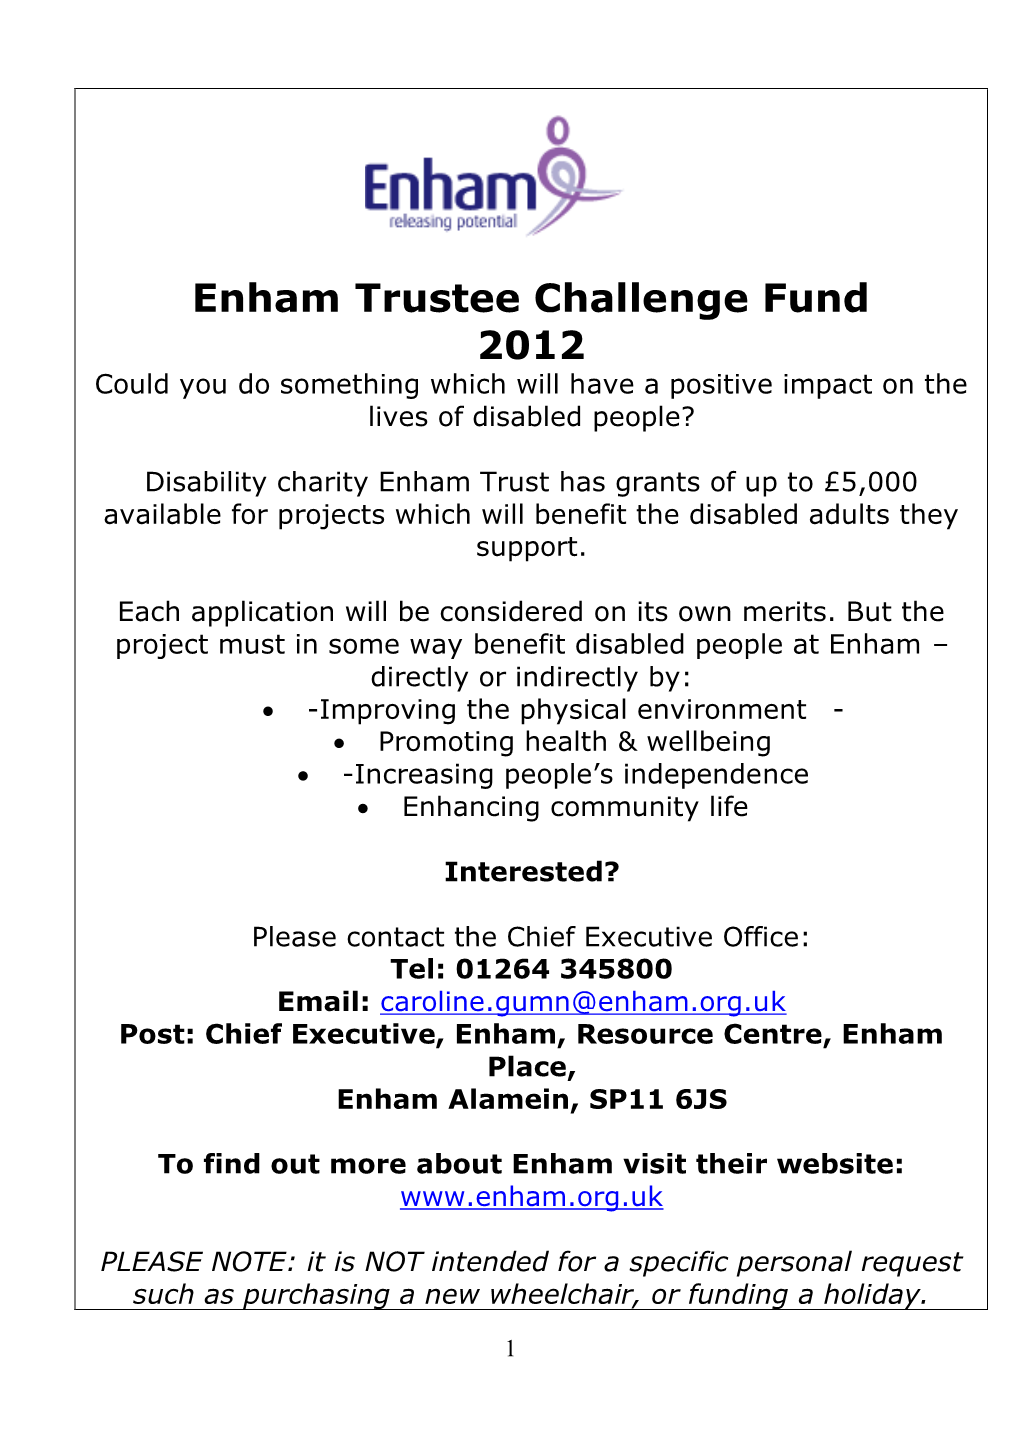 Enham Trustee Challenge Fund 2012 Could You Do Something Which Will Have a Positive Impact on the Lives of Disabled People?